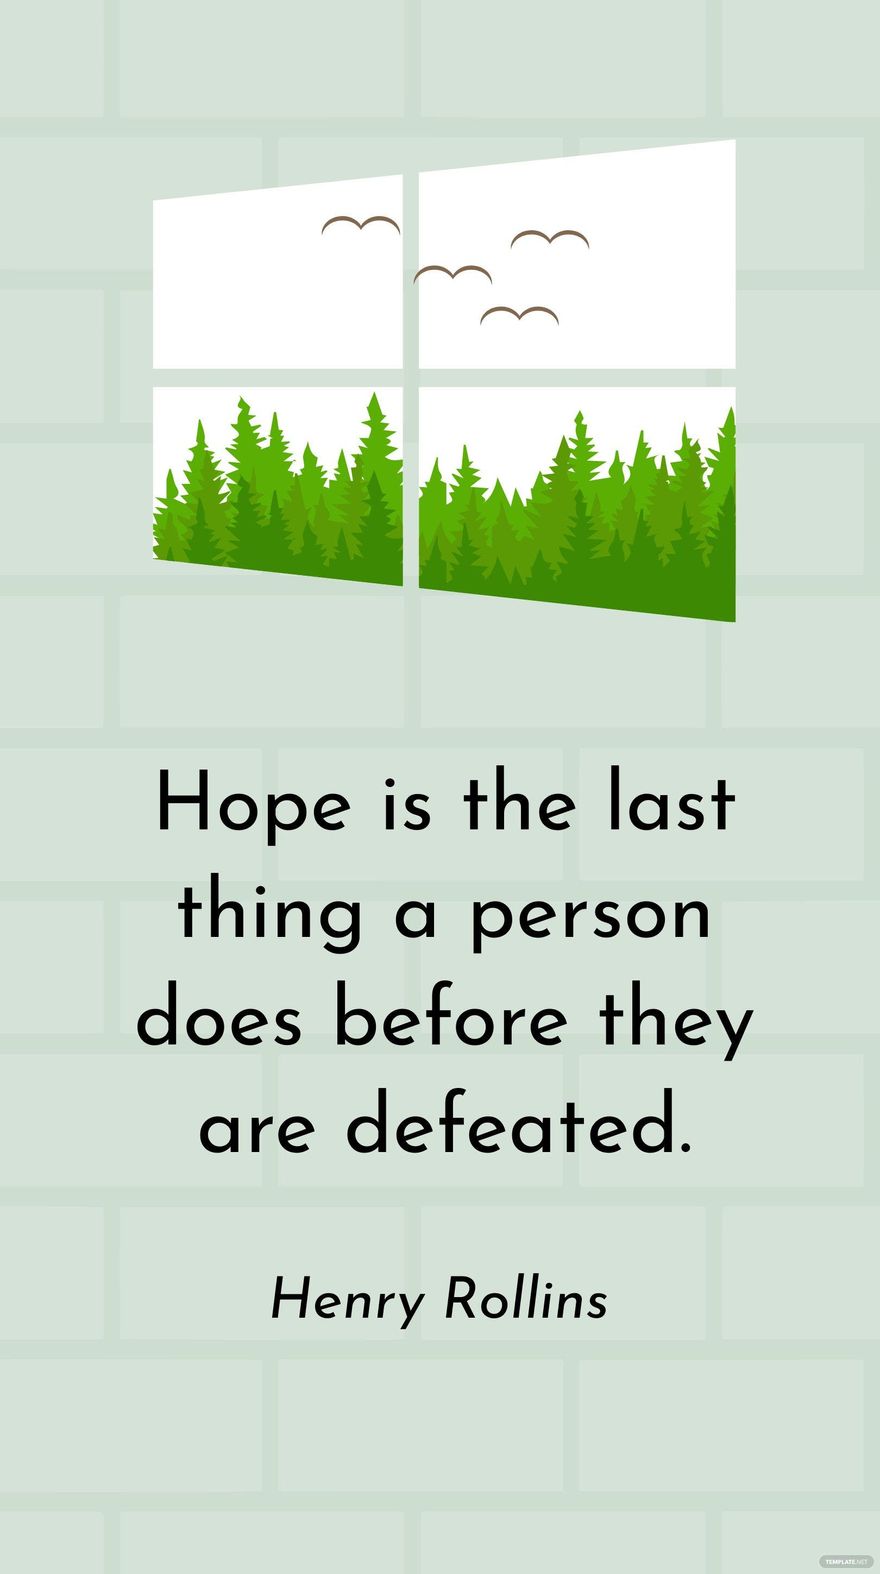 Henry Rollins - Hope is the last thing a person does before they are defeated.